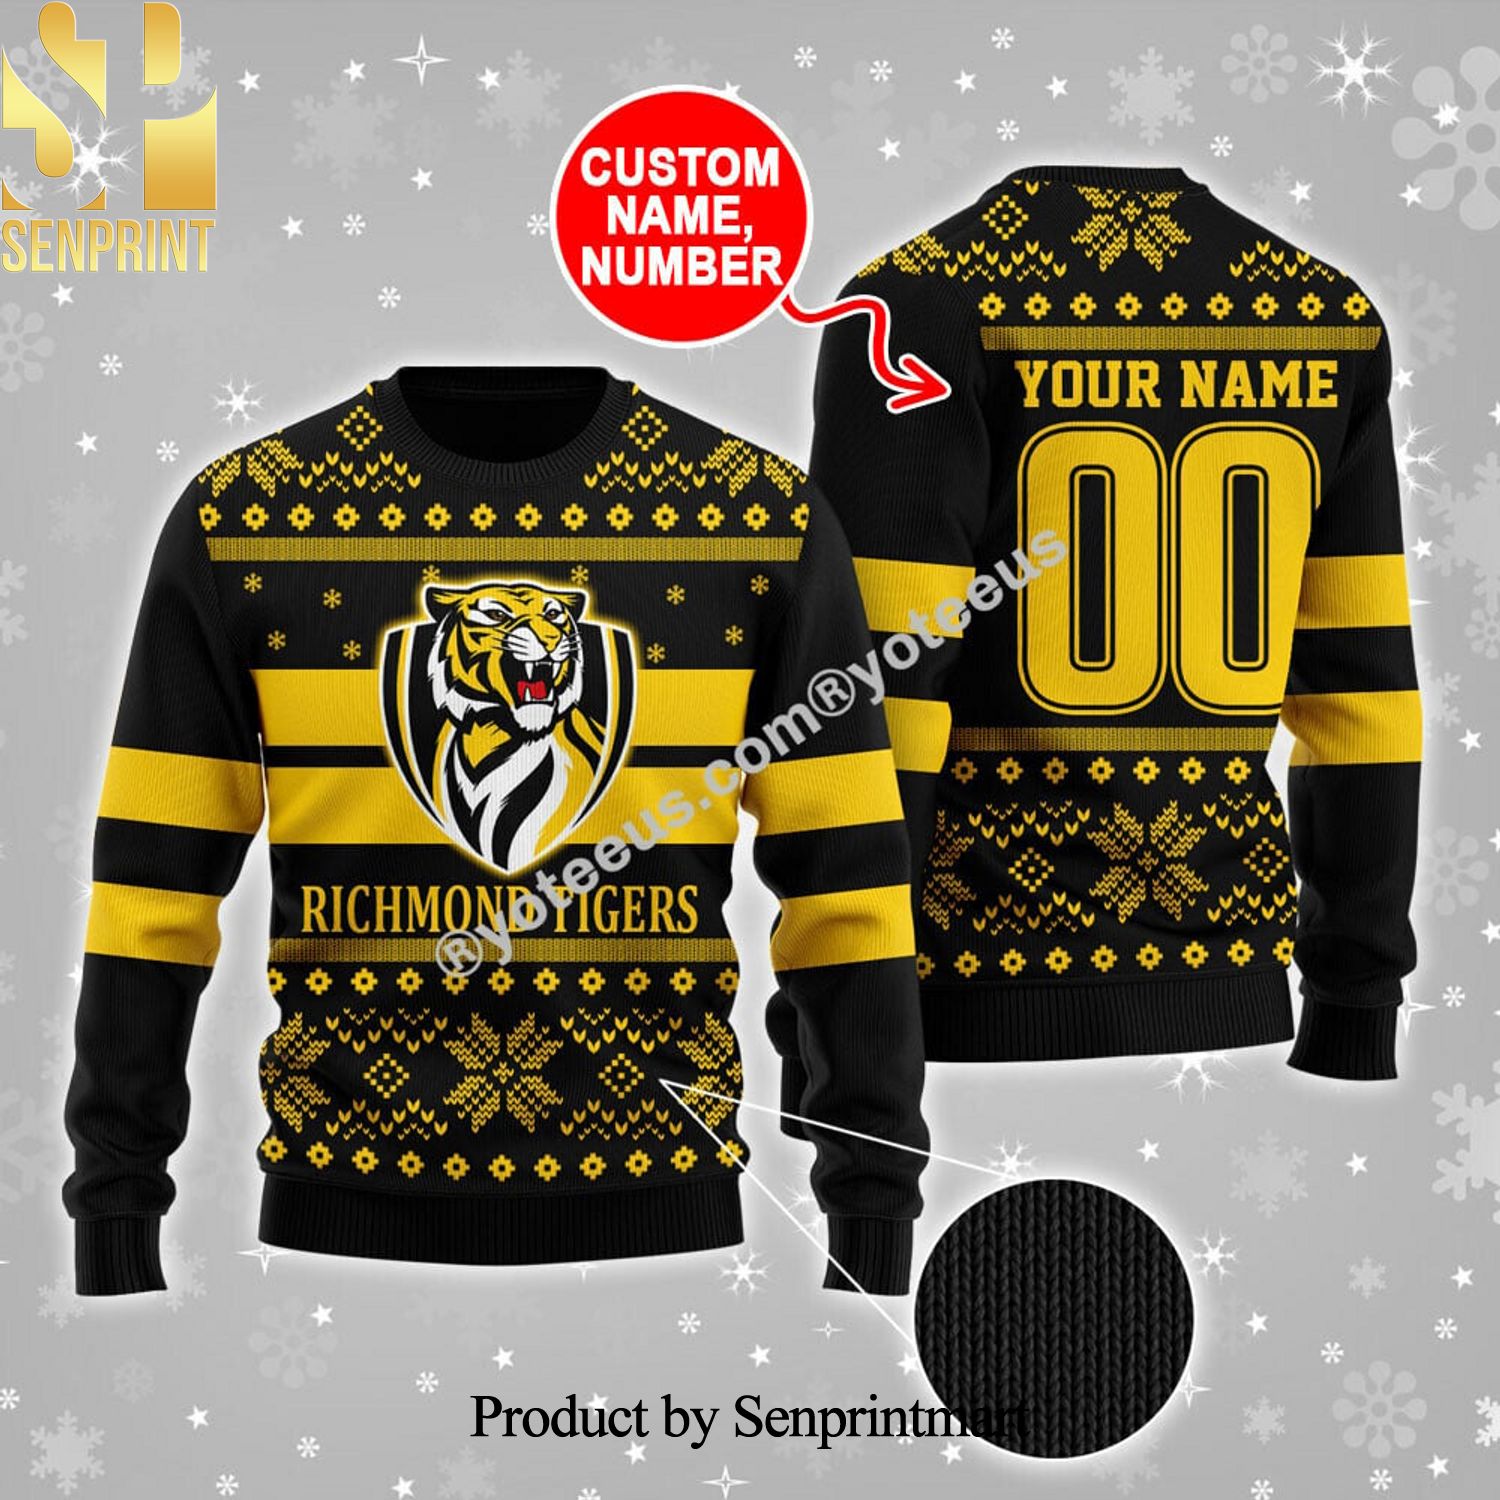 Richmond Tigers Ugly Christmas Holiday Sweater